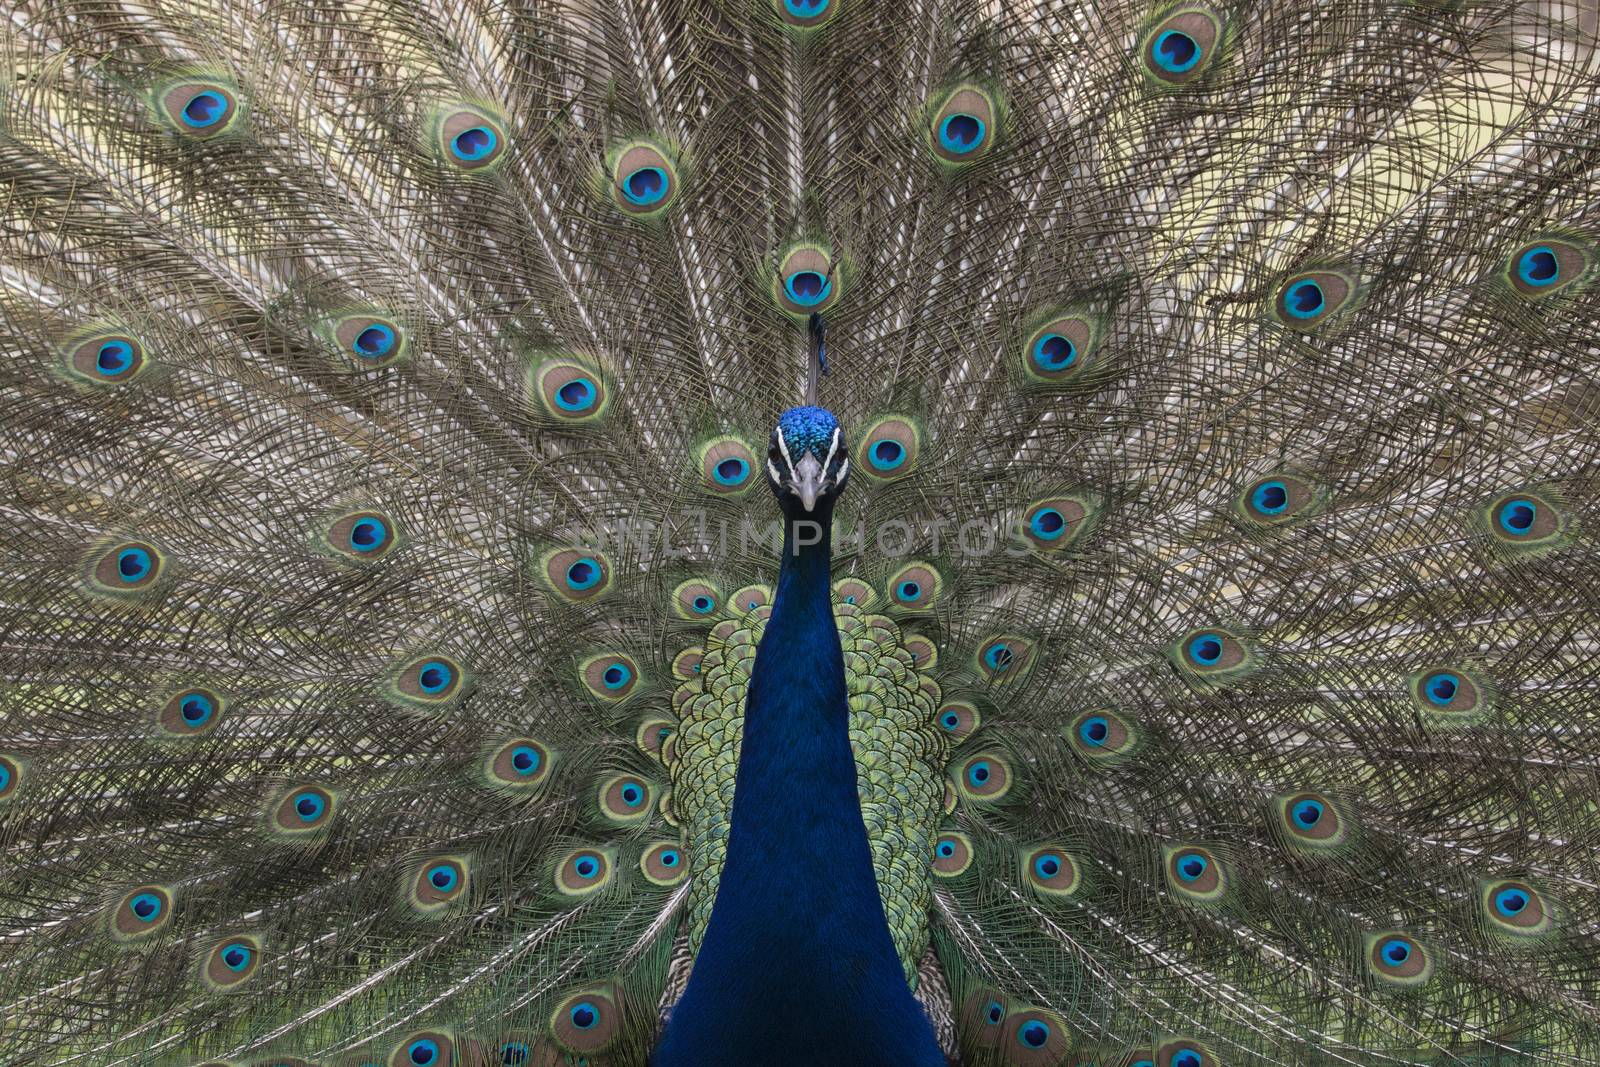 Peacock, front